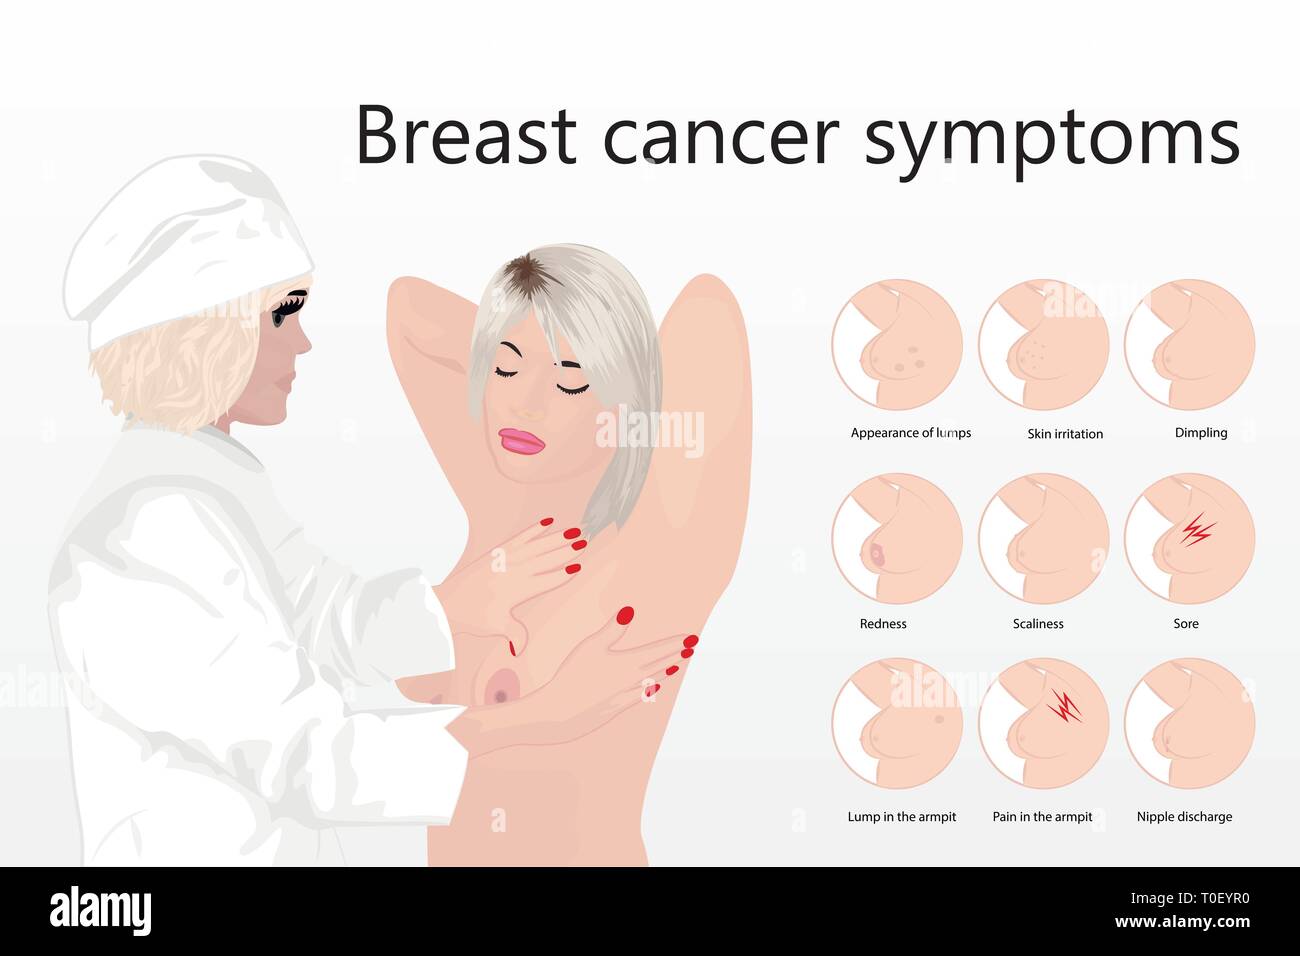 breast cancer symptoms and examination at a doctor  symptoms vector illustration Stock Vector